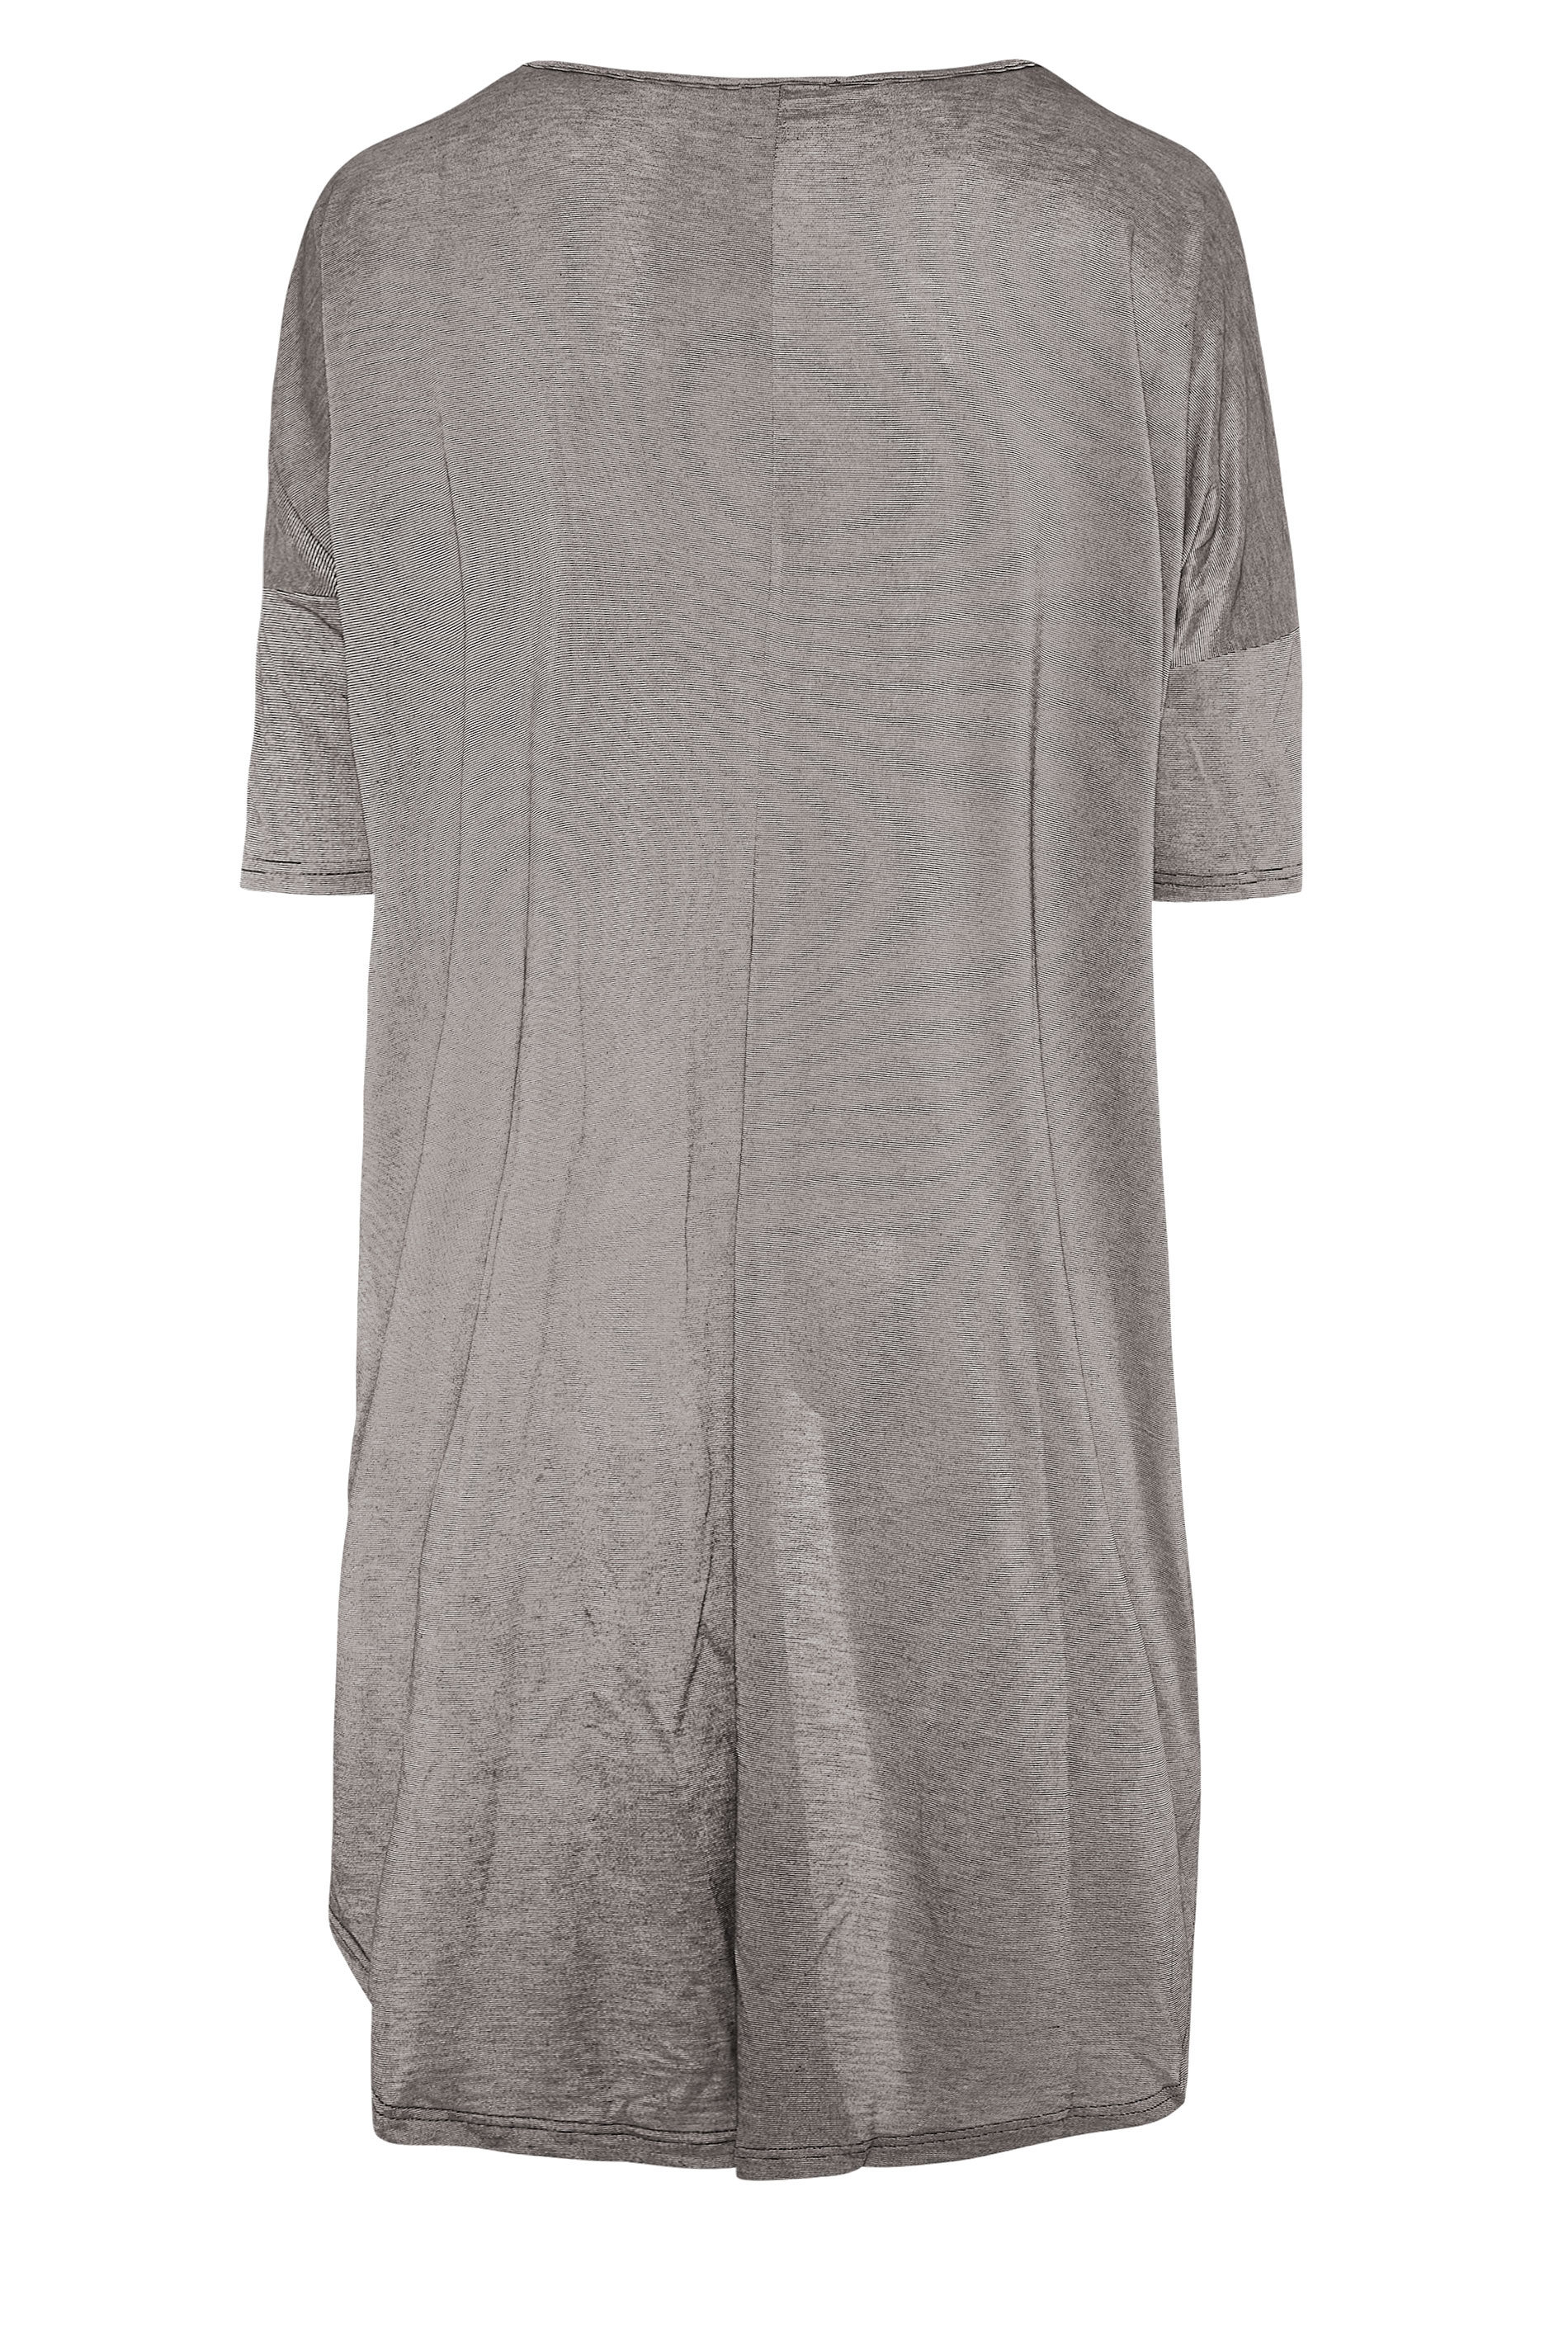 Grande taille  Tops Grande taille  T-Shirts | Curve Silver Metallic Longline Dipped Hem T-Shirt - DO22742